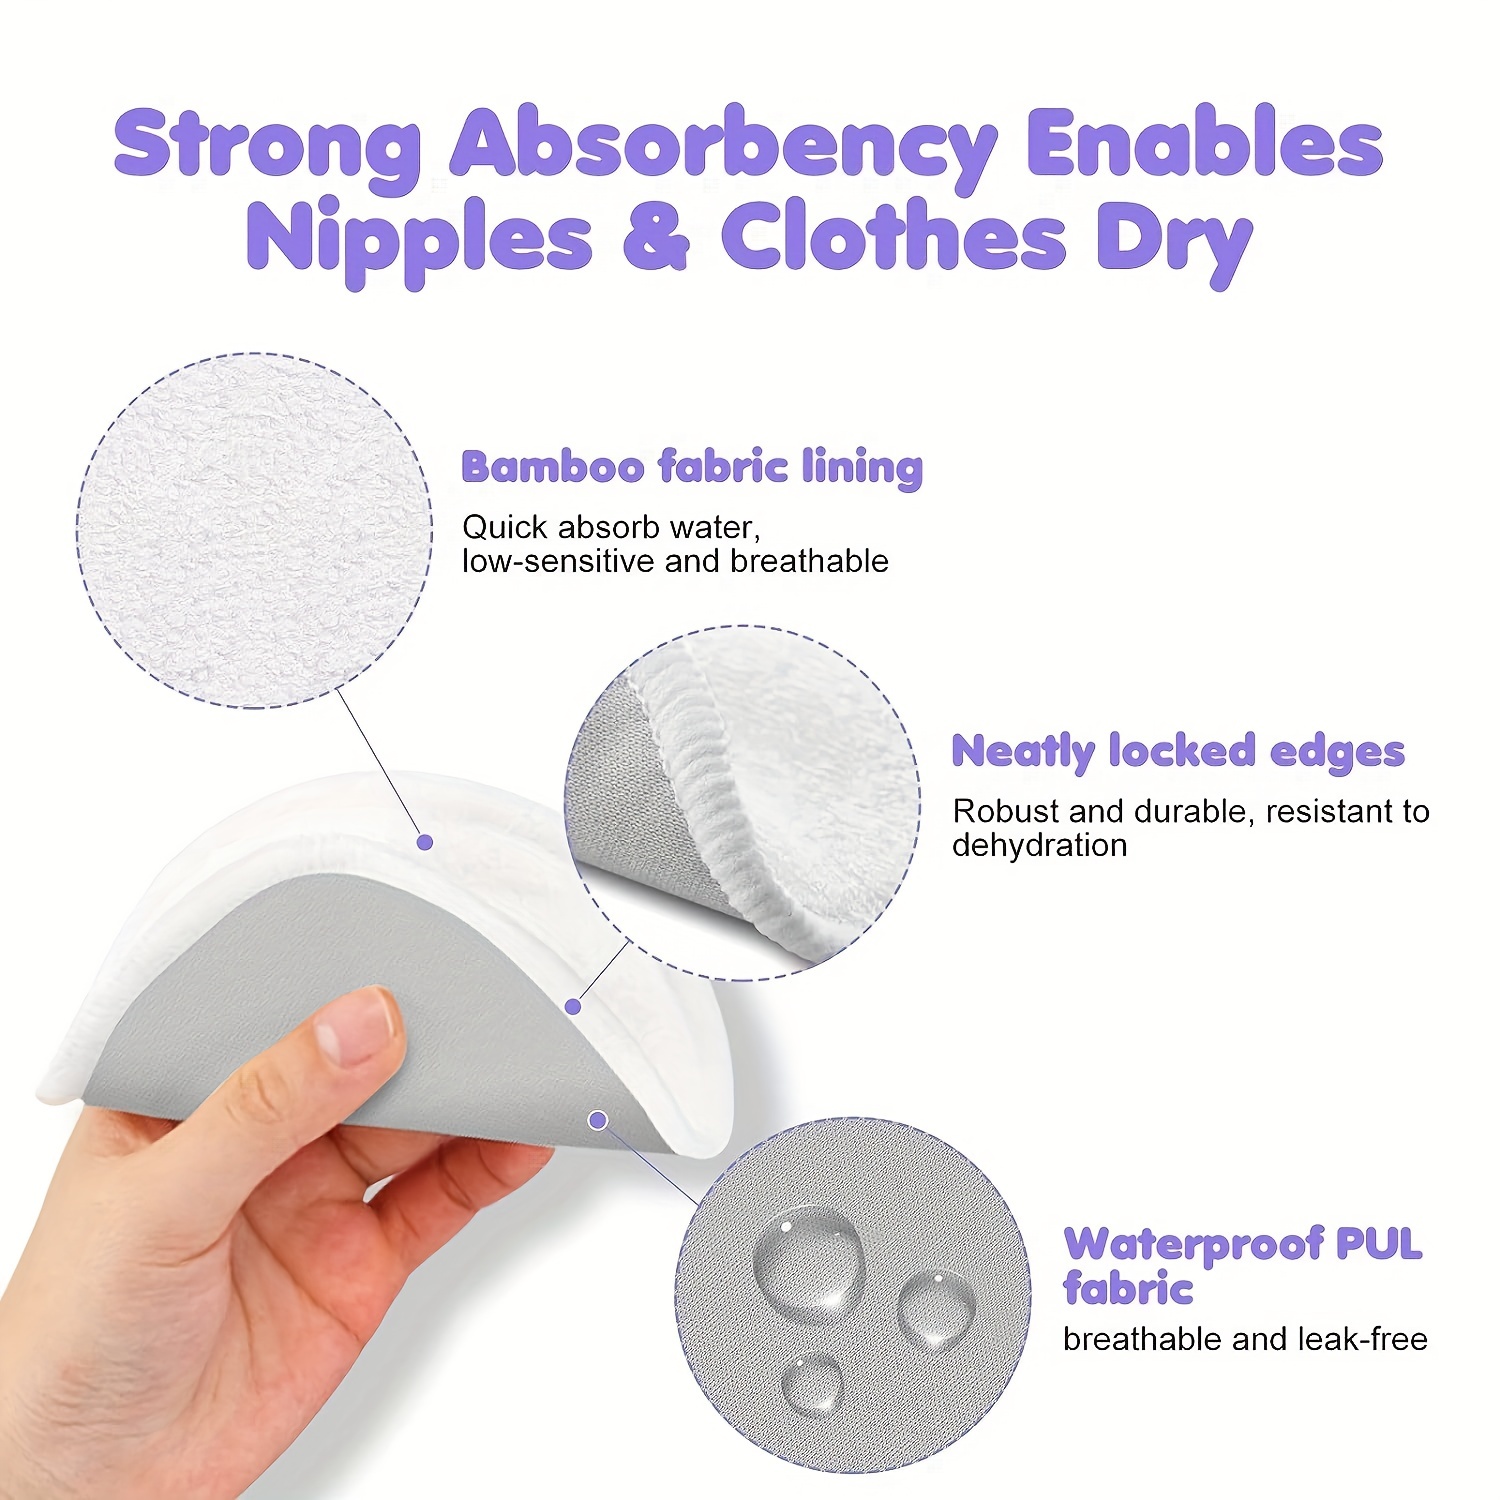 Reusable Nursing Pads 4 Pack, Washable Breast Pads for Breastfeeding  4.7inch Large Size Nursing Pads for New moms Pink